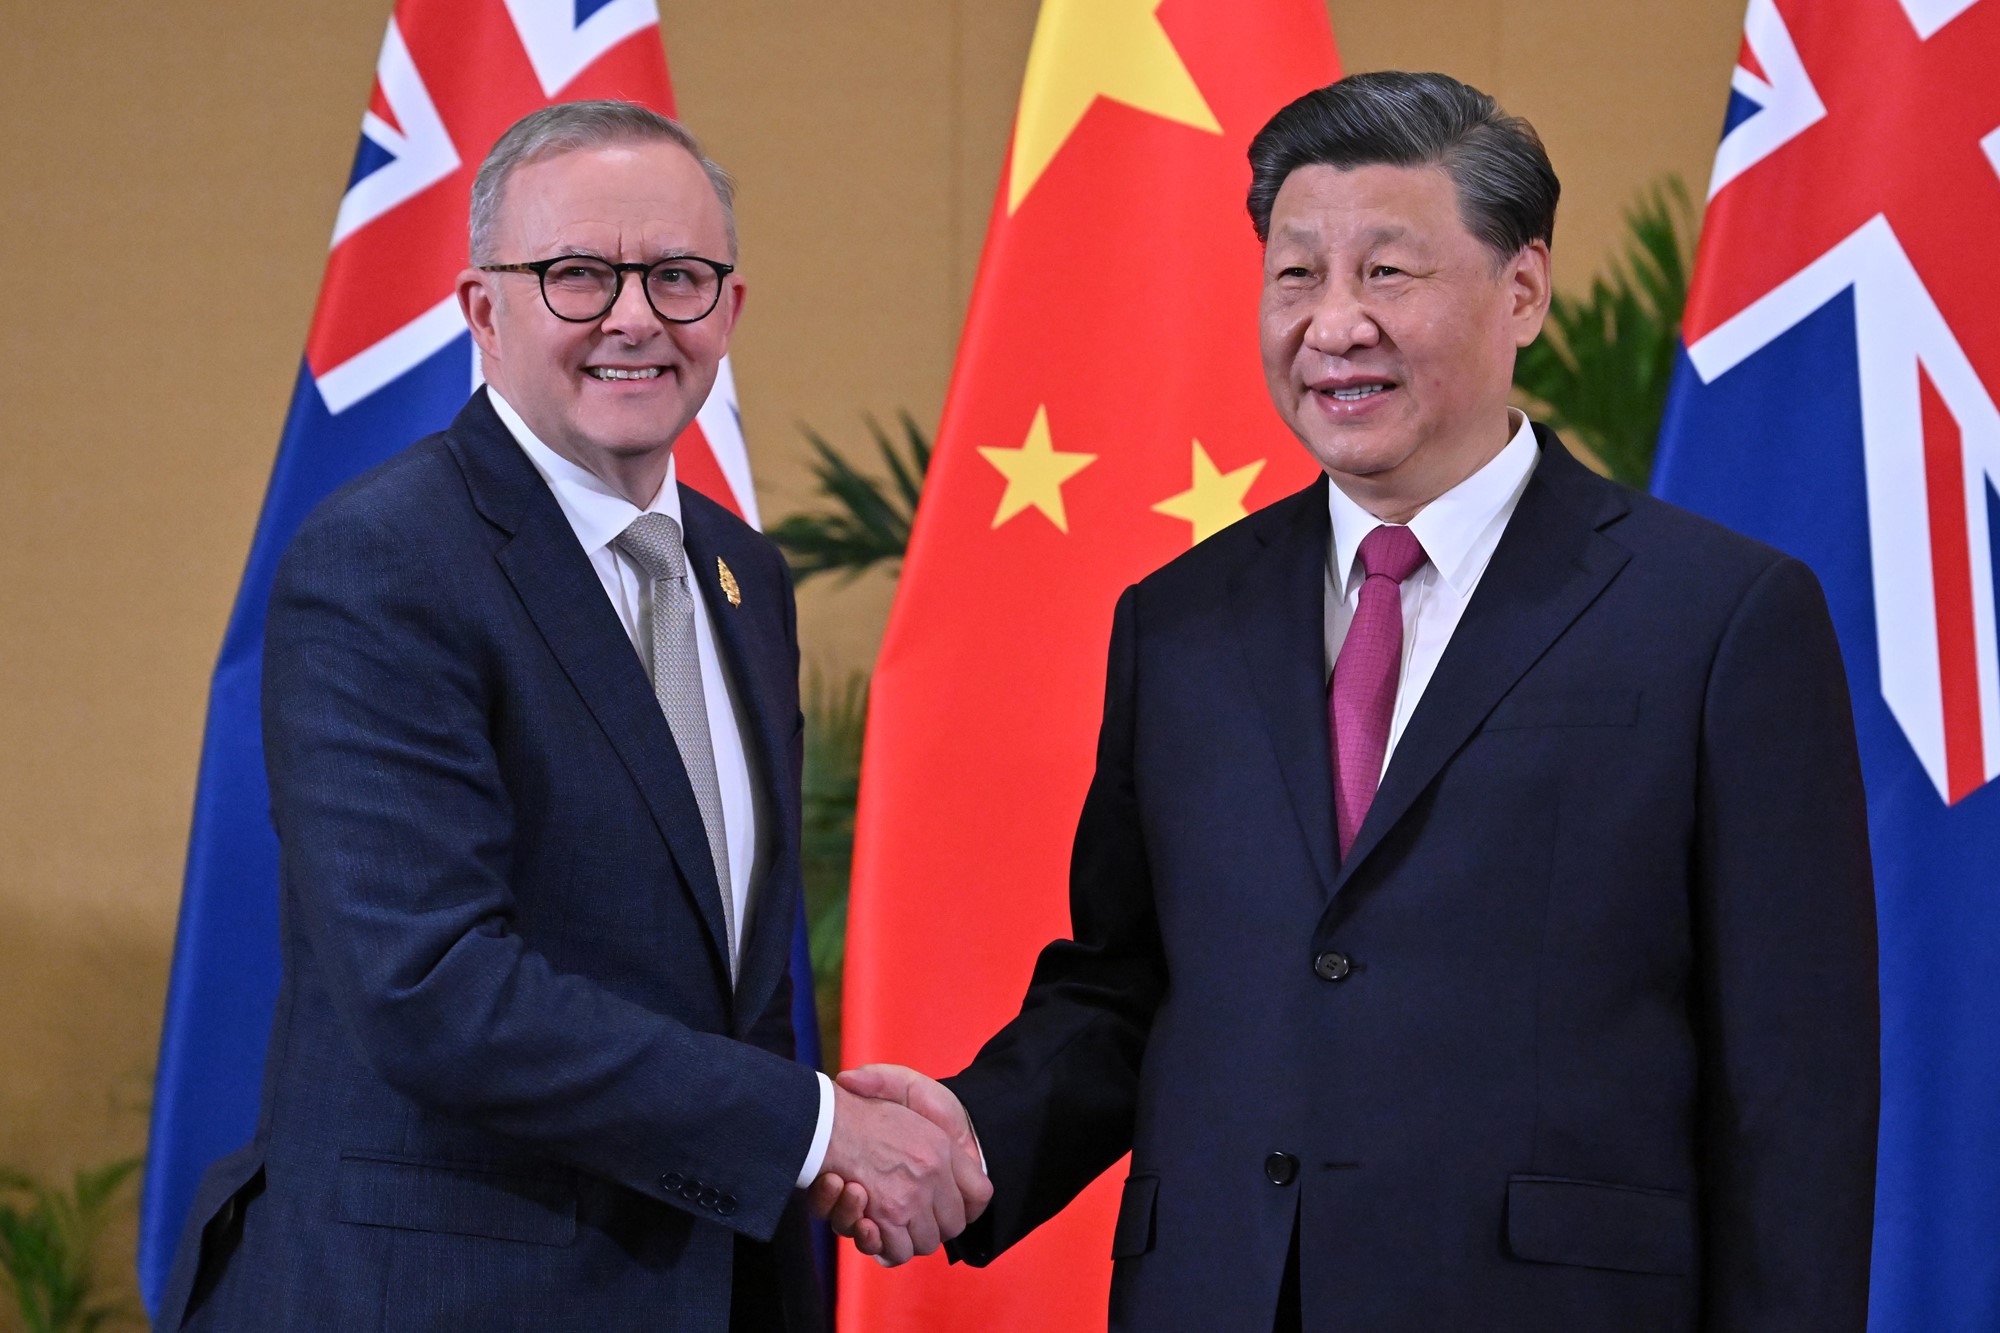 Anthony Albanese and Xi Jinping shake hands in front of Chinese and Australian flags